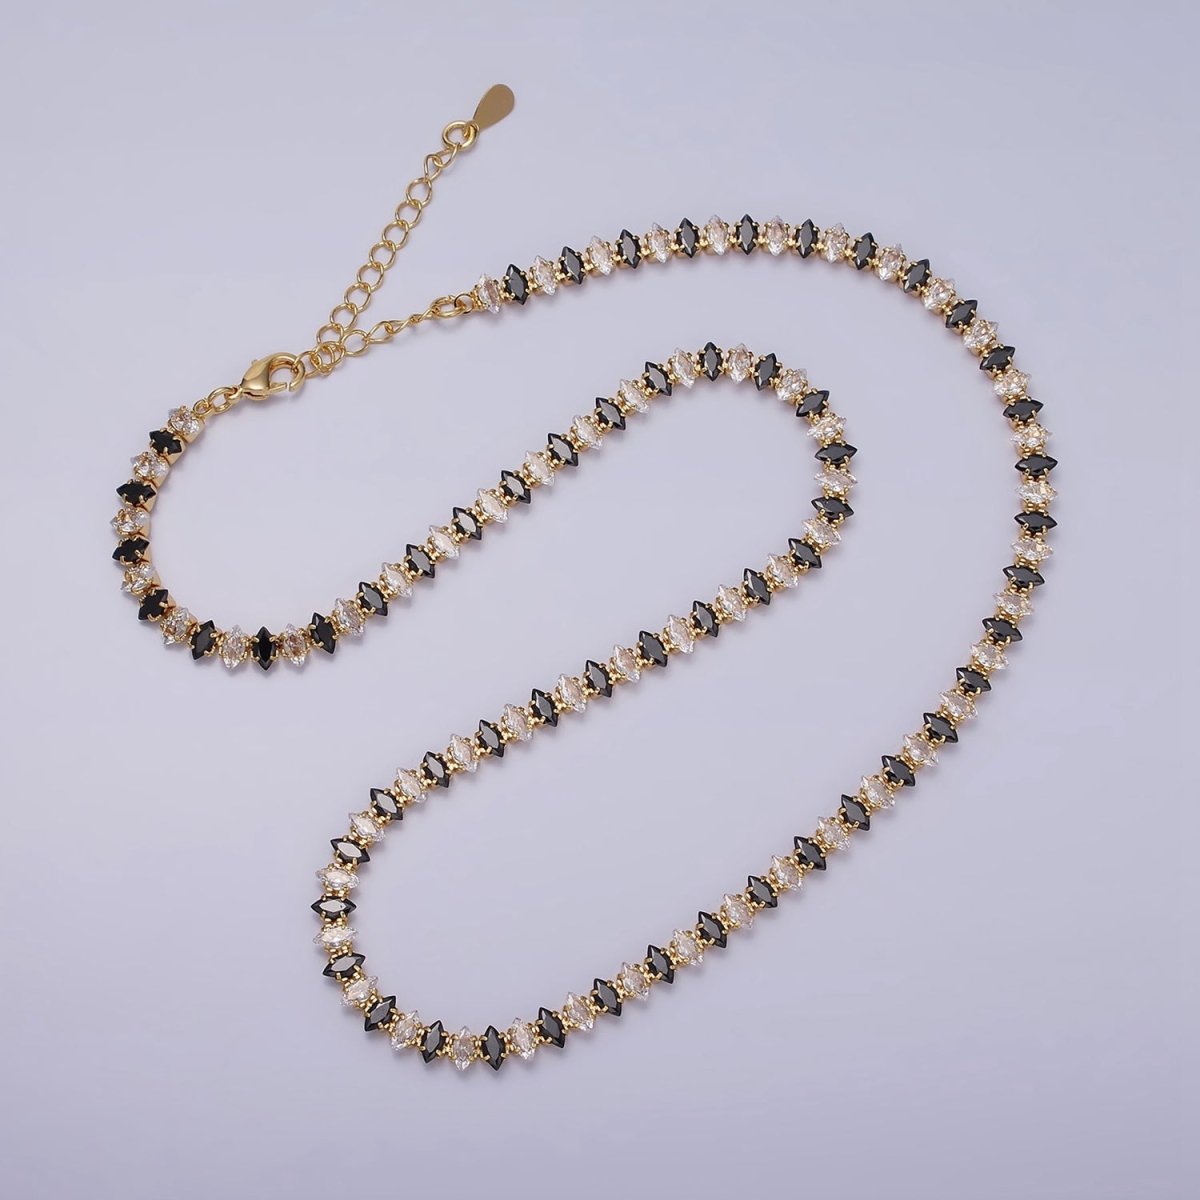 16K Gold Filled Clear, Black, Checkered 5mm Marquise CZ 17 Inch Tennis Chain Necklace | WA-1767 - WA-1769 Clearance Pricing - DLUXCA